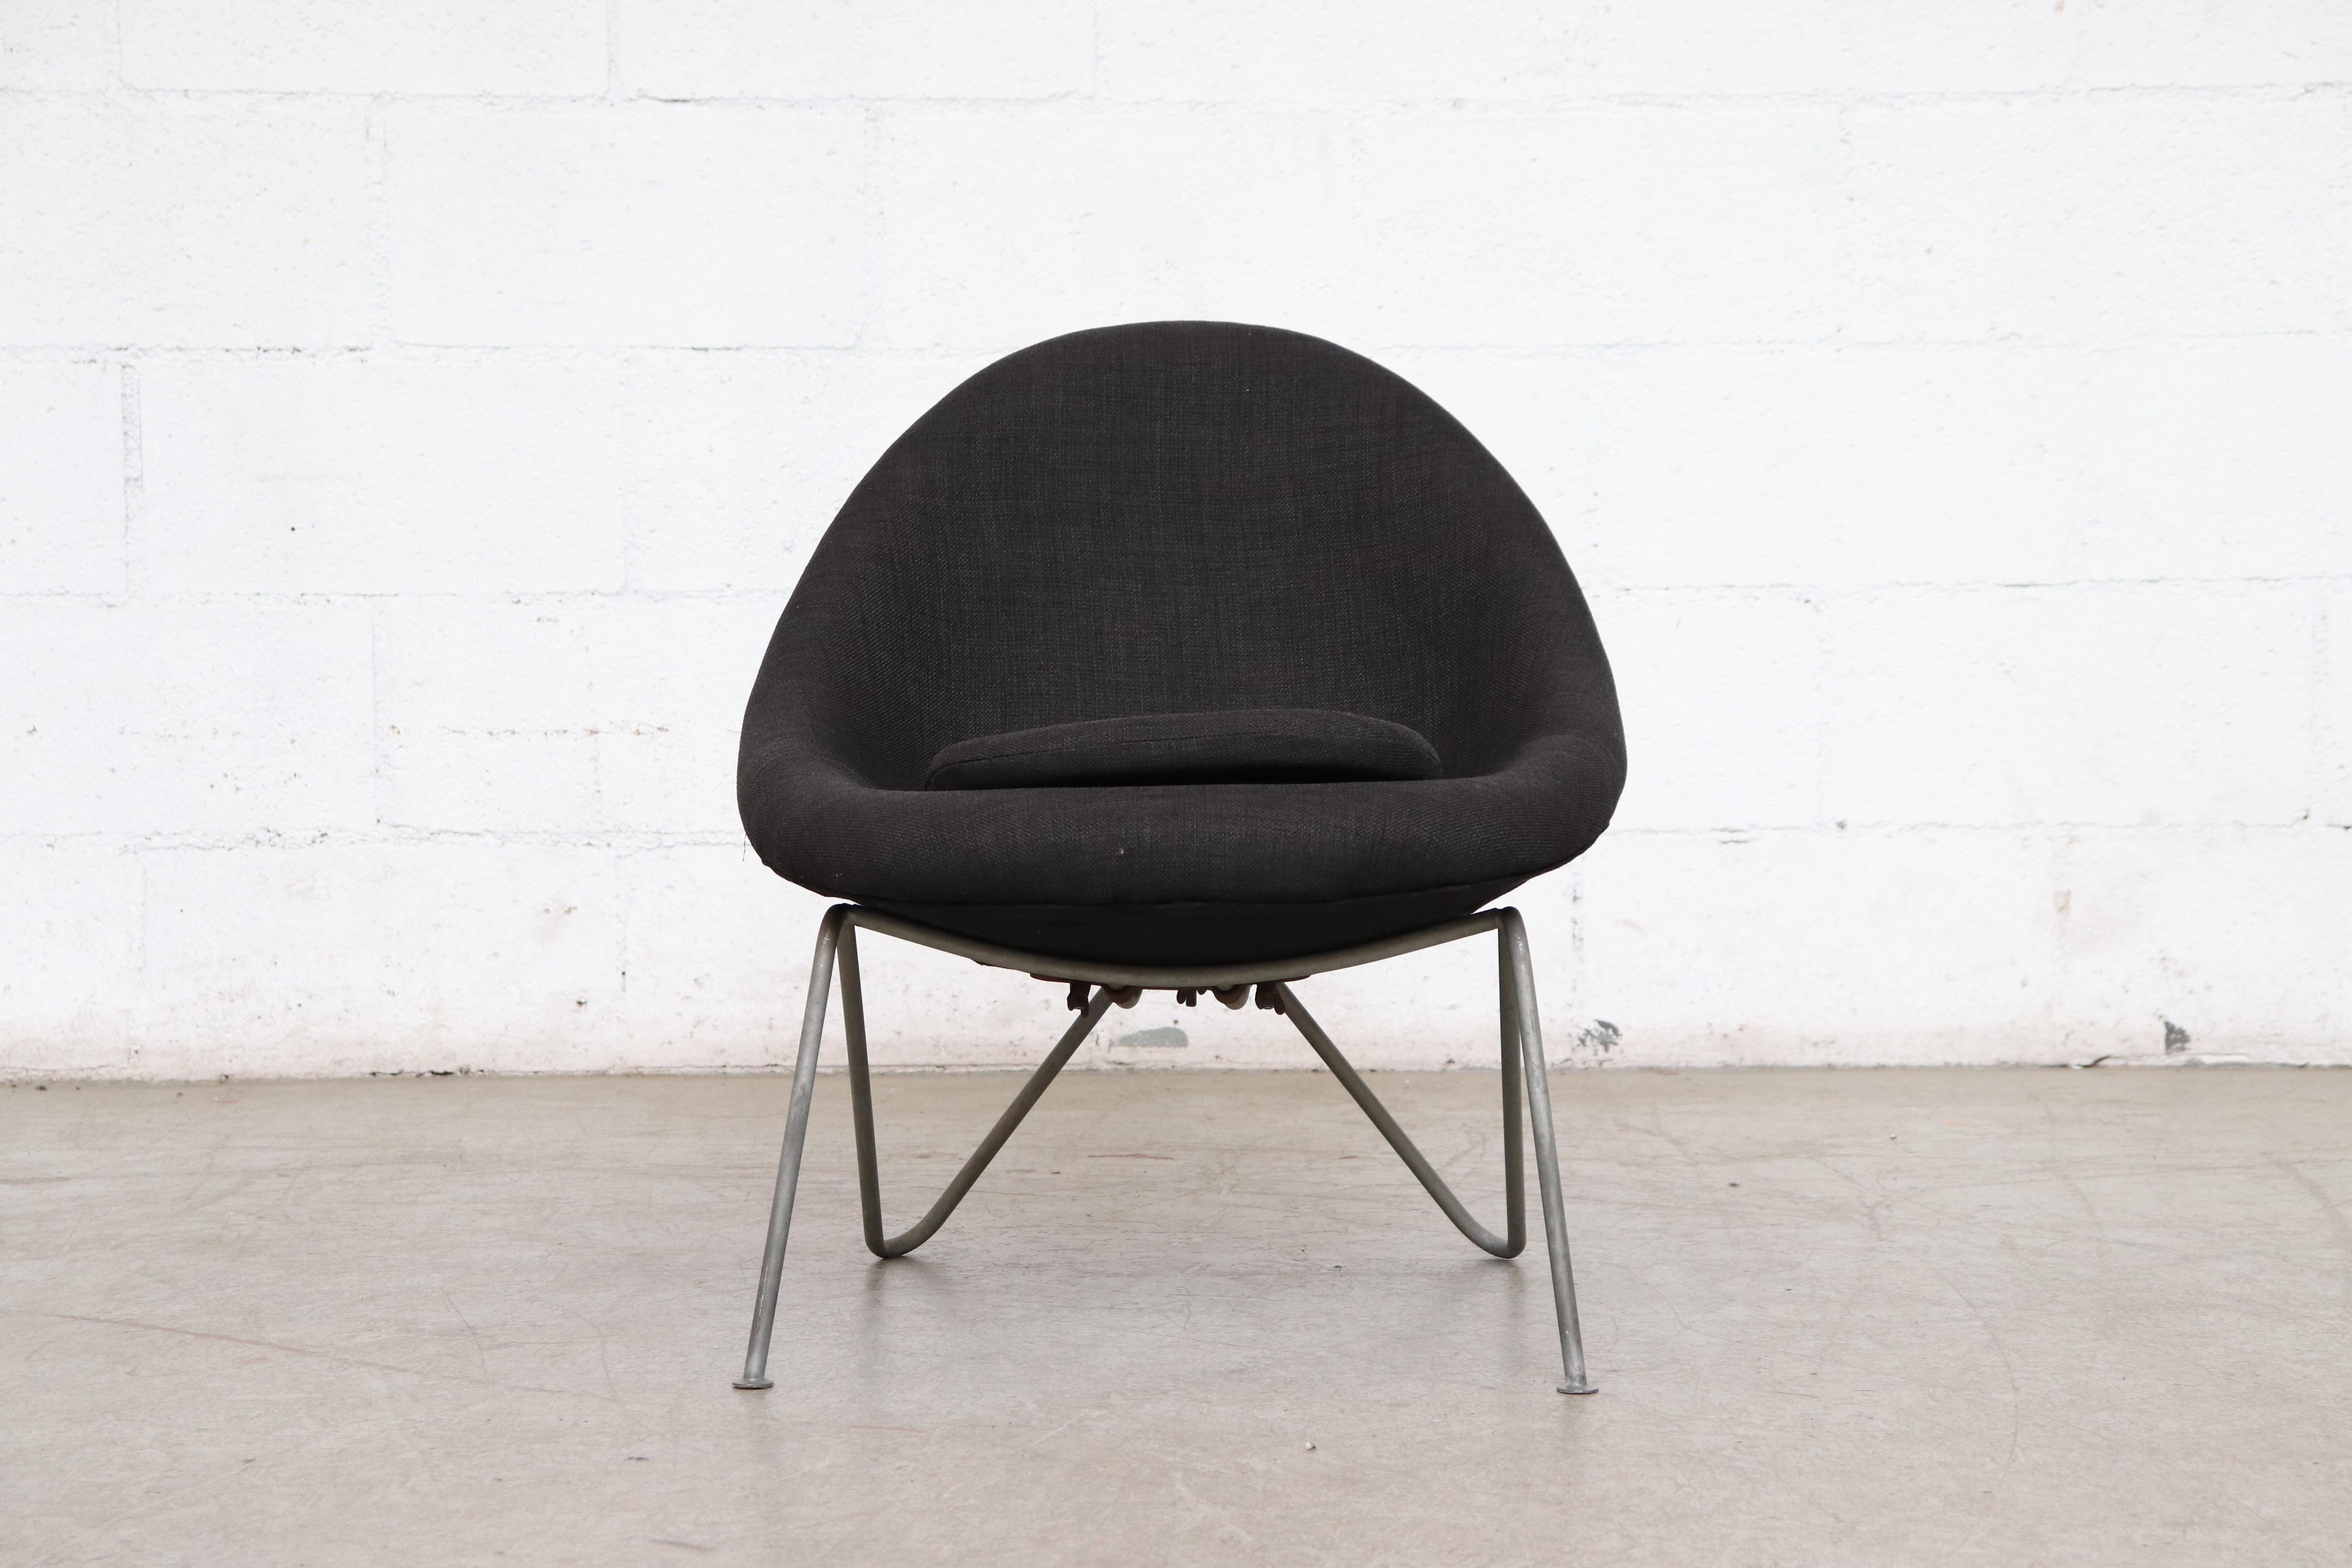 Single petite midcentury bucket chair newly upholstered in black fabric with original grey bent wire enameled metal frame with visible wear consistent with age and use.